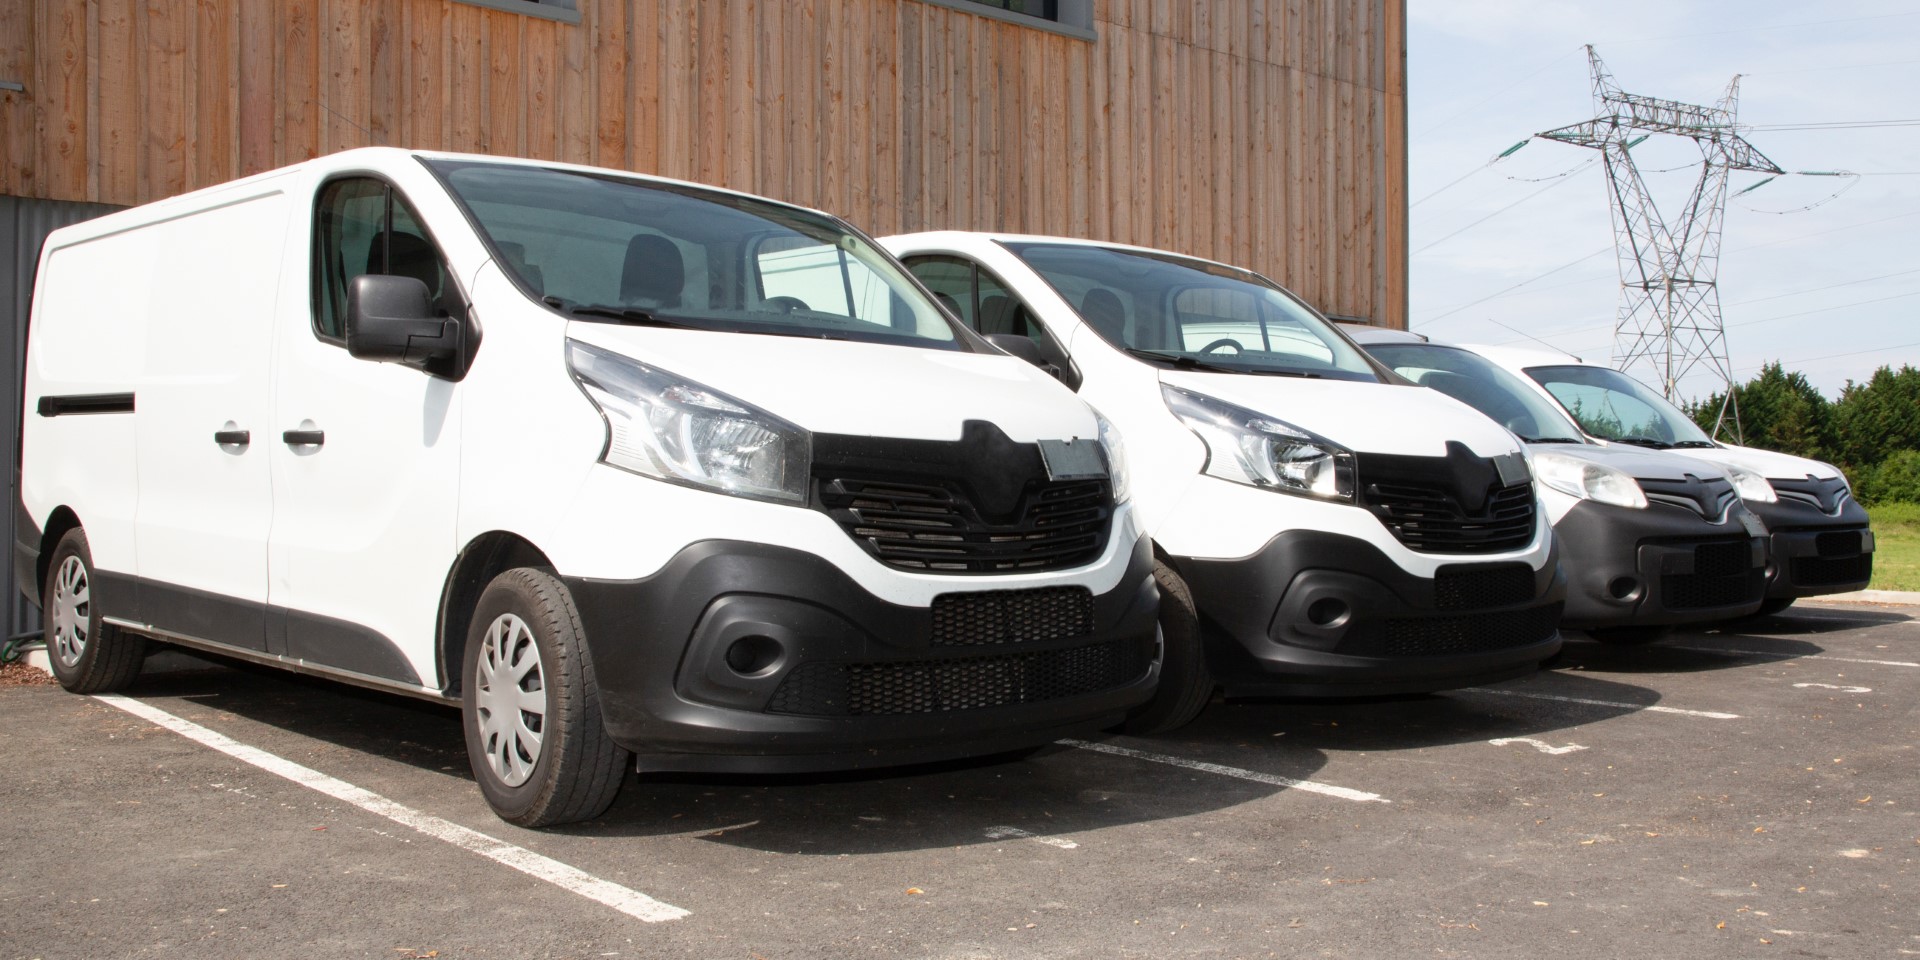 Light commercial vehicle registrations have increased but there is concern over the lack of services availability.